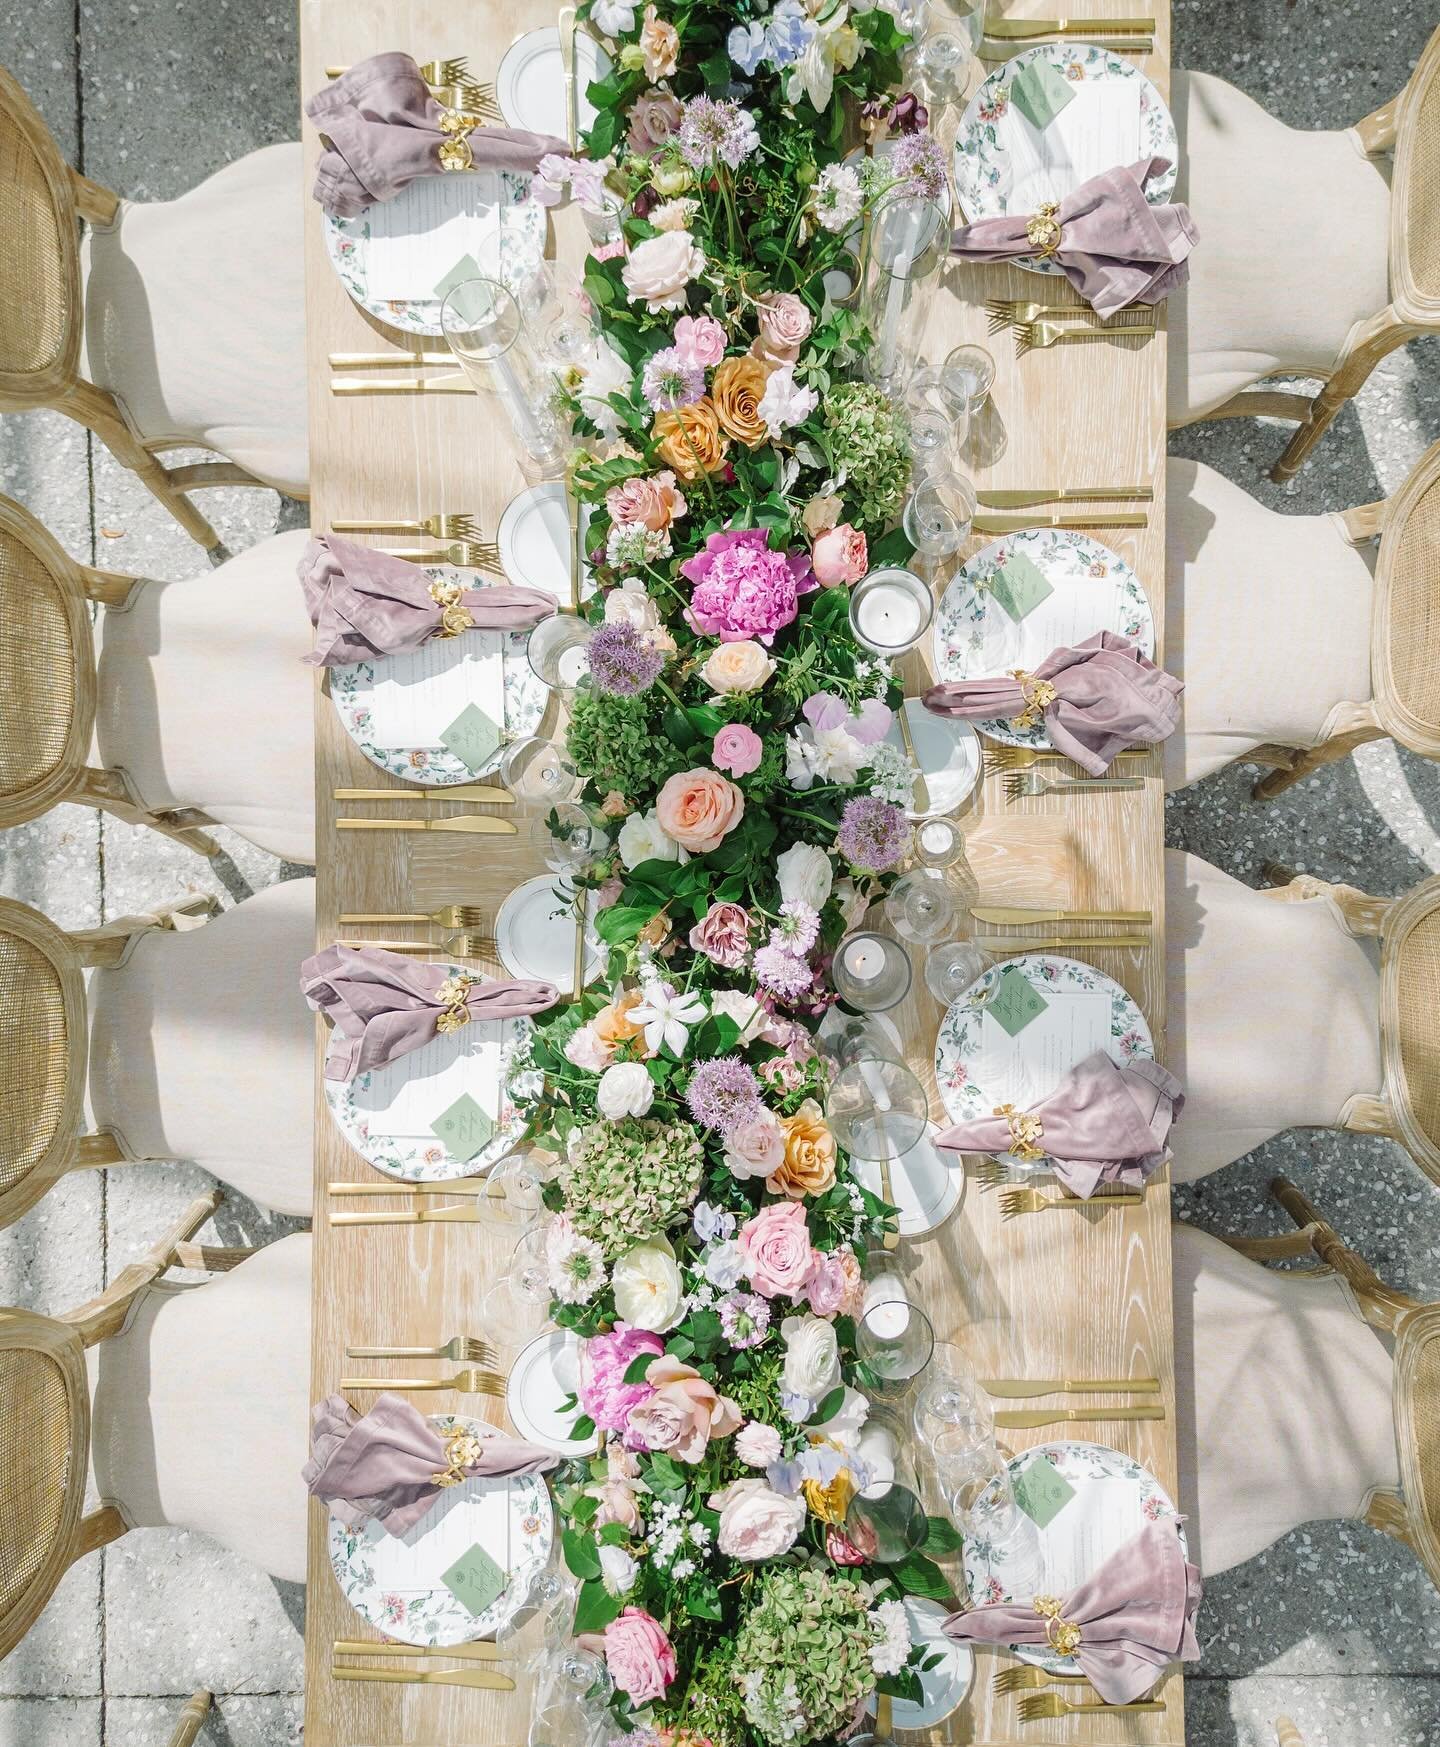 Love these shots from different perspectives. Here&rsquo;s your sign to fly the drone inside your tent. 
.
.
.
Photo: @aaronandjillian 
Floral: @stephaniegibbsevents 
Rentals: @whitebirchrentals  @snyderevents  @curatedeventscharleston  @bbjlatavola 